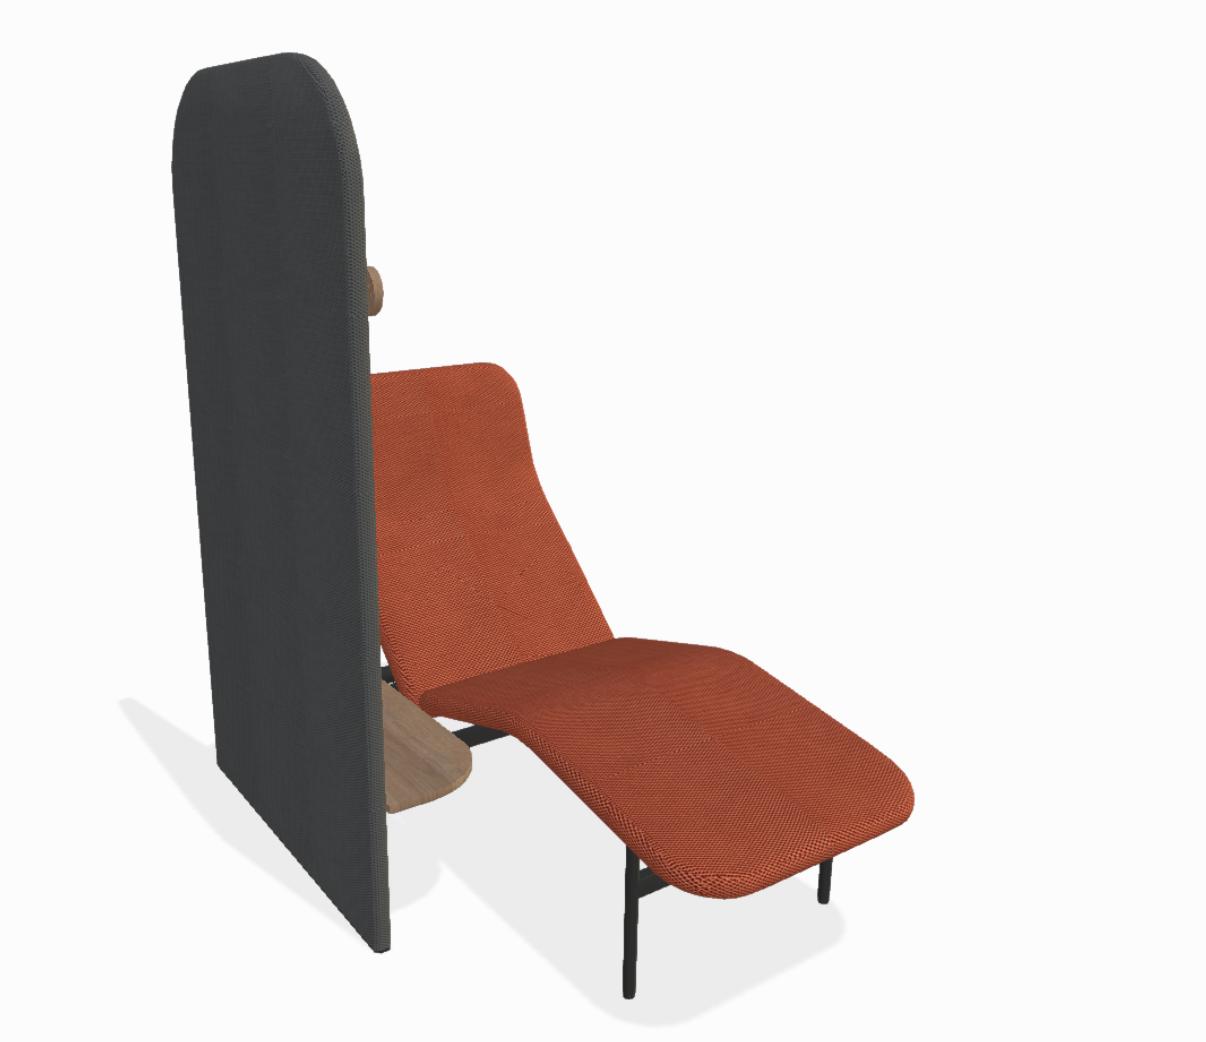  KFI Studios Avalon Chaise Lounge Chair with Privacy Screen and Side Table 